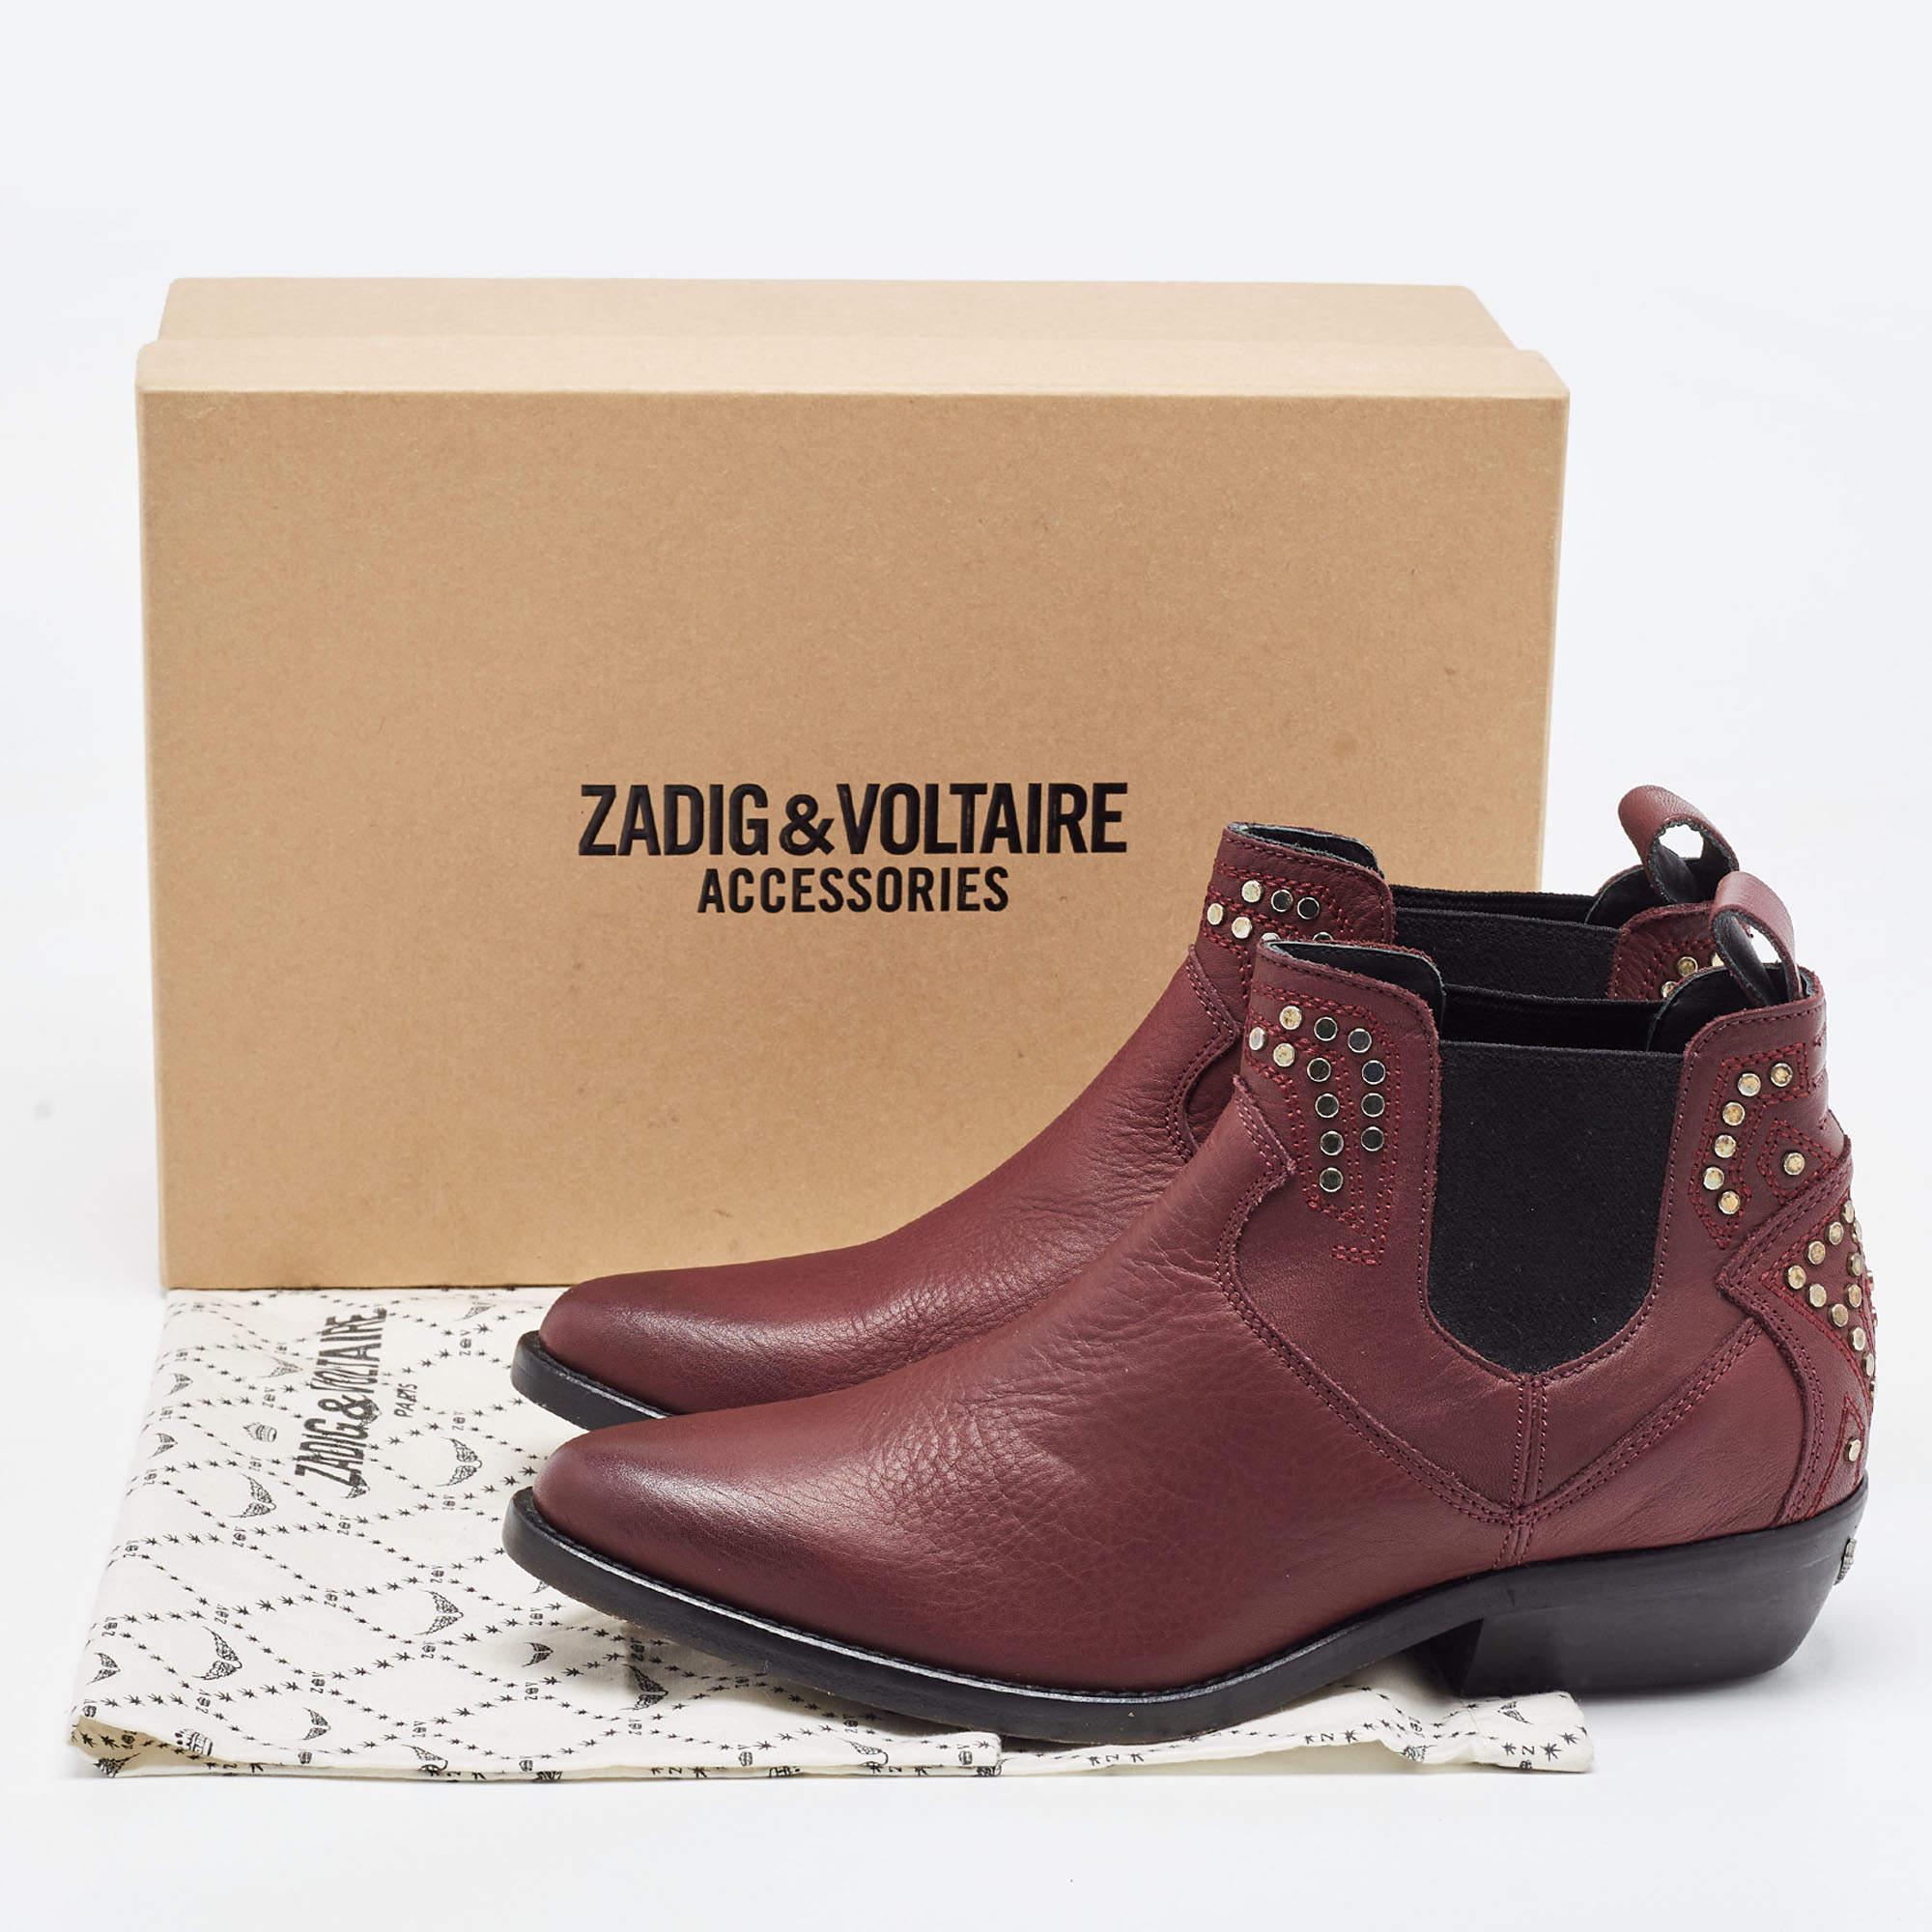 Zadig & Voltaire Burgundy Leather Ankle Boots Size 37 1